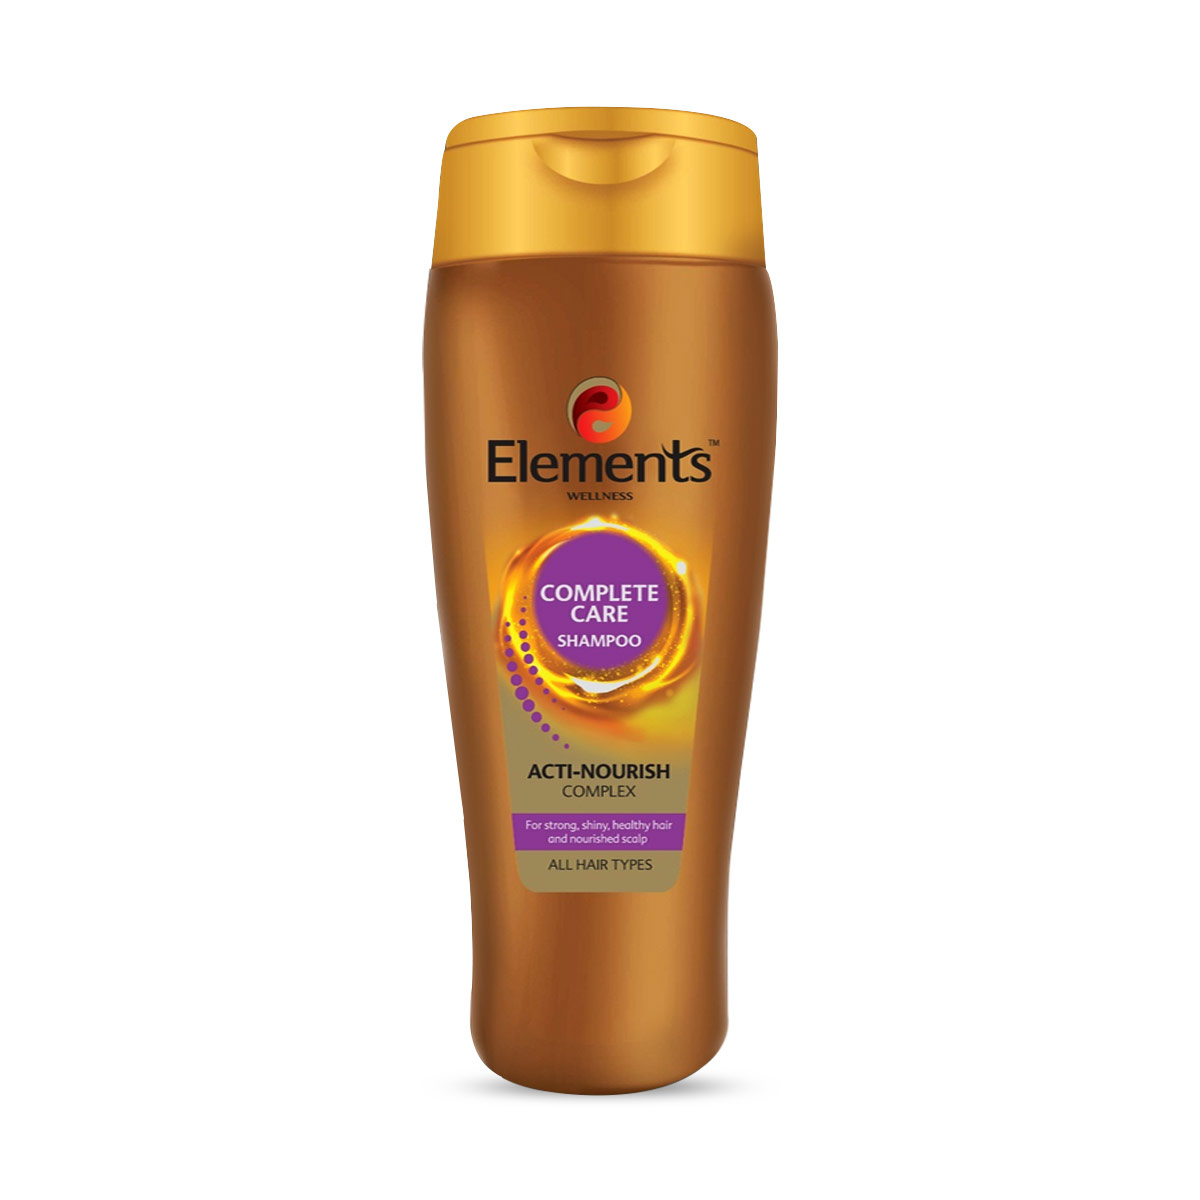 Buy Elements Complete Care Shampoo at Best Price Online